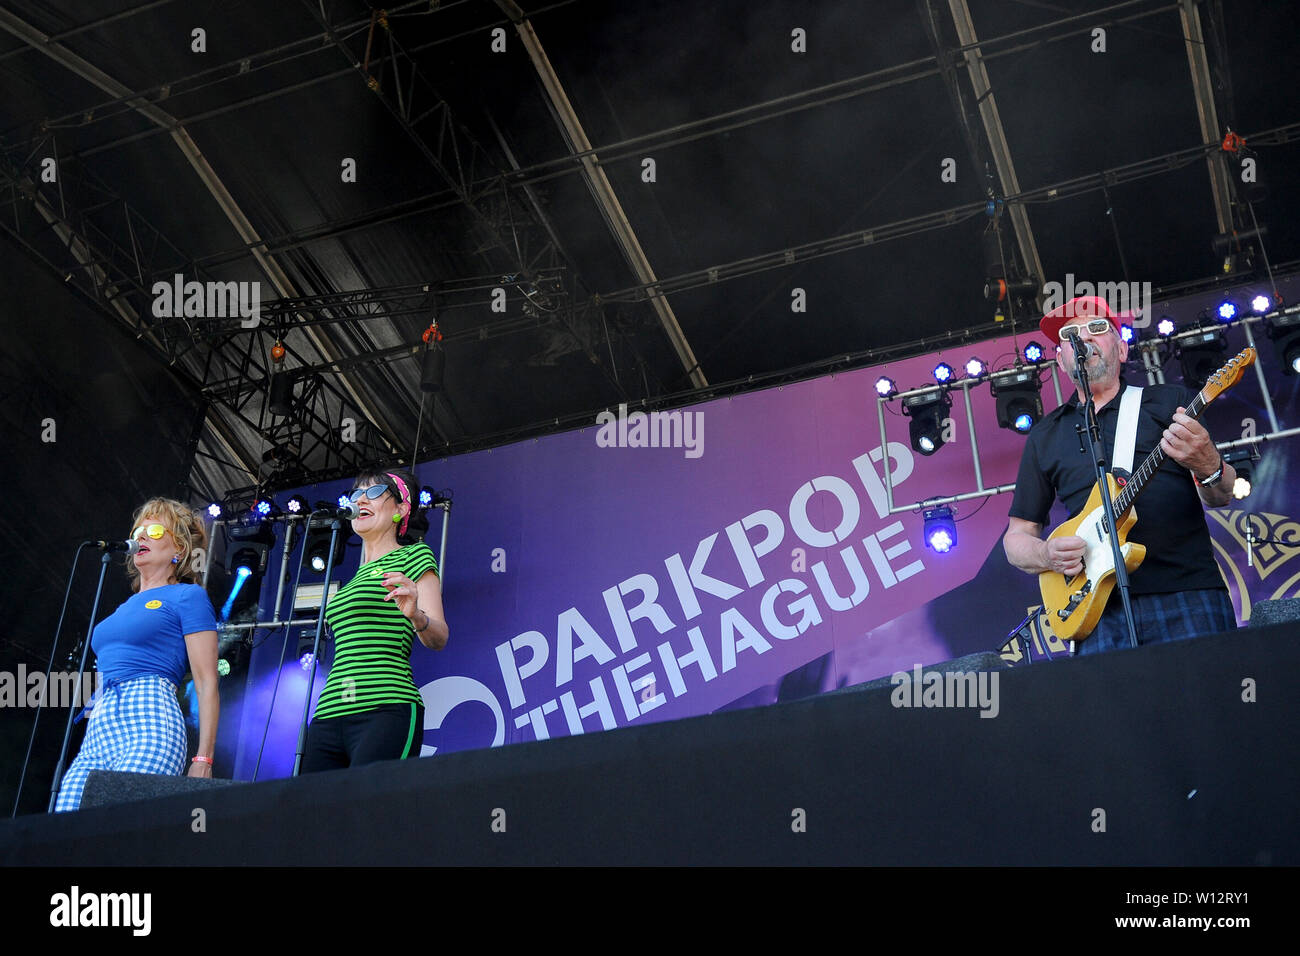 The Hague, Netherlands. 29th June, 2019. The Hague, 29-06-2019, Parkpop Saturday Night, Zuiderpark, Gruppo Sportivo Credit: Pro Shots/Alamy Live News Stock Photo